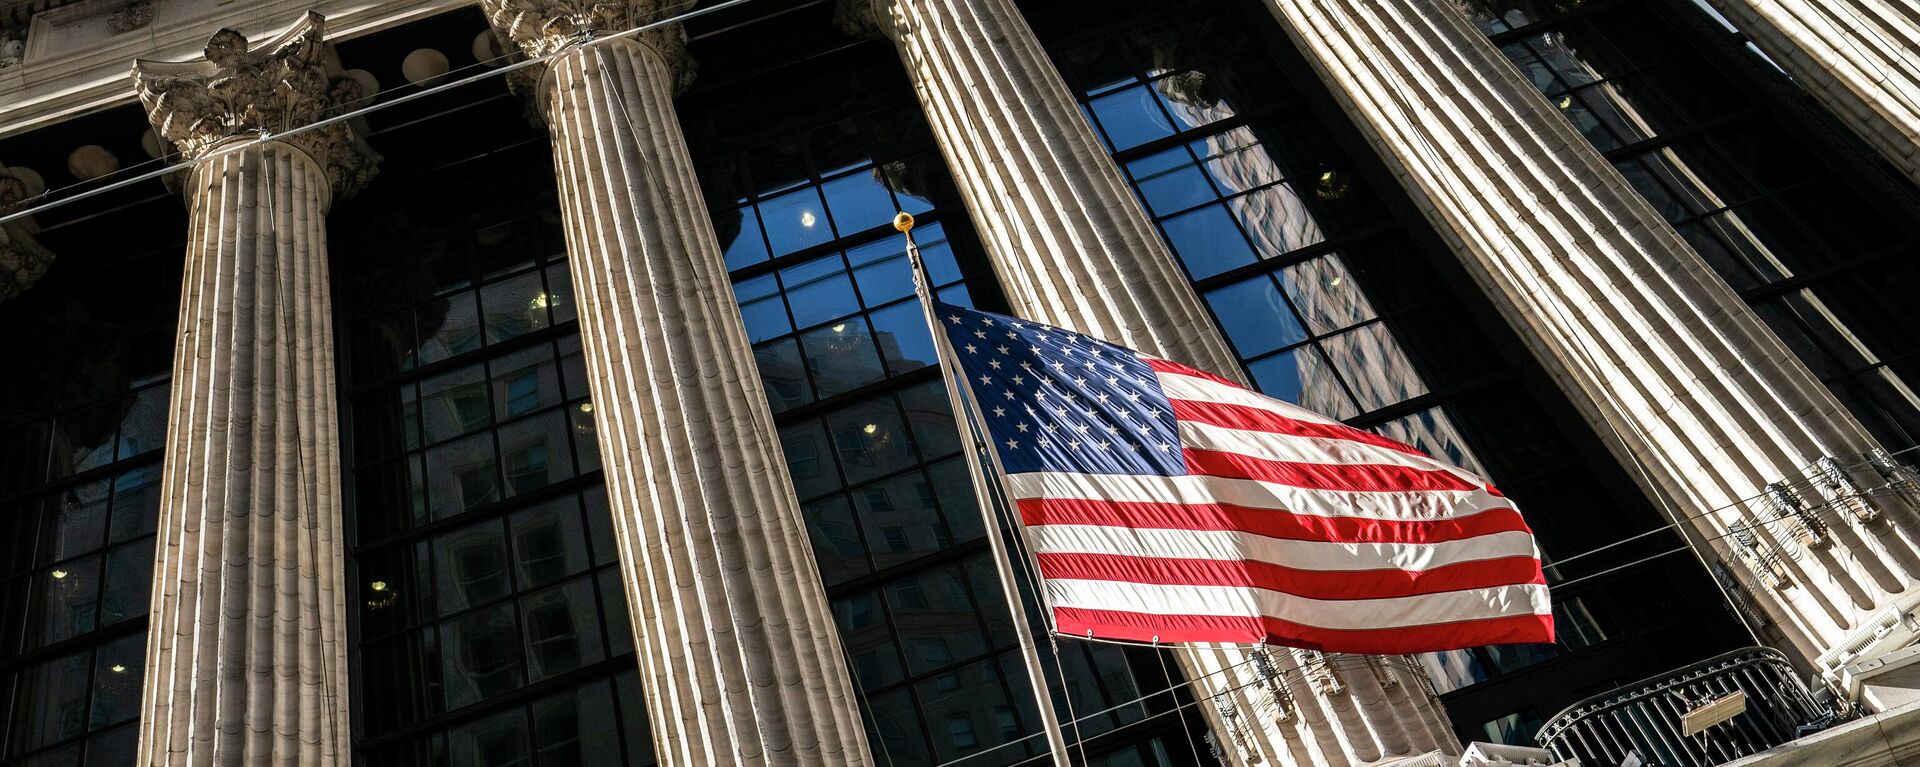 A U.S. flag waves outside the New York Stock Exchange, Monday, Jan. 24, 2022, in New York. Stocks are drifting between small gains and losses in the early going on Wall Street Tuesday, May 3, 2022 as investors await Wednesday's decision by the Federal Reserve on interest rates. The Fed is expected to raise its benchmark rate by twice the usual amount this week as it steps up its fight against inflation, which is at a four-decade high. - Sputnik International, 1920, 13.12.2023